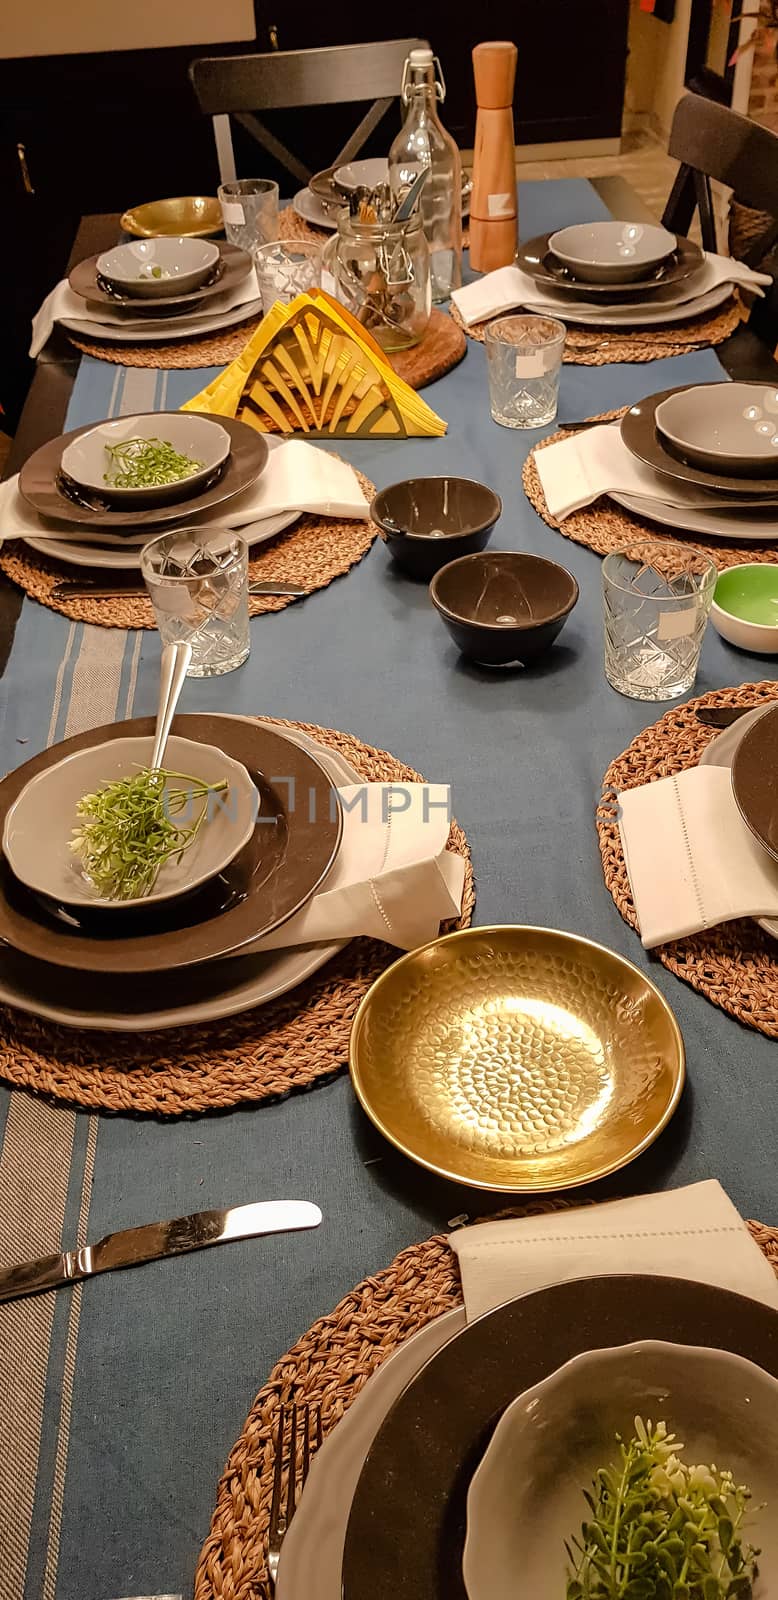 On the festive table in the wedding banquet area there are plates, glasses, candles, cutlery, the table is decorated with compositions in brown